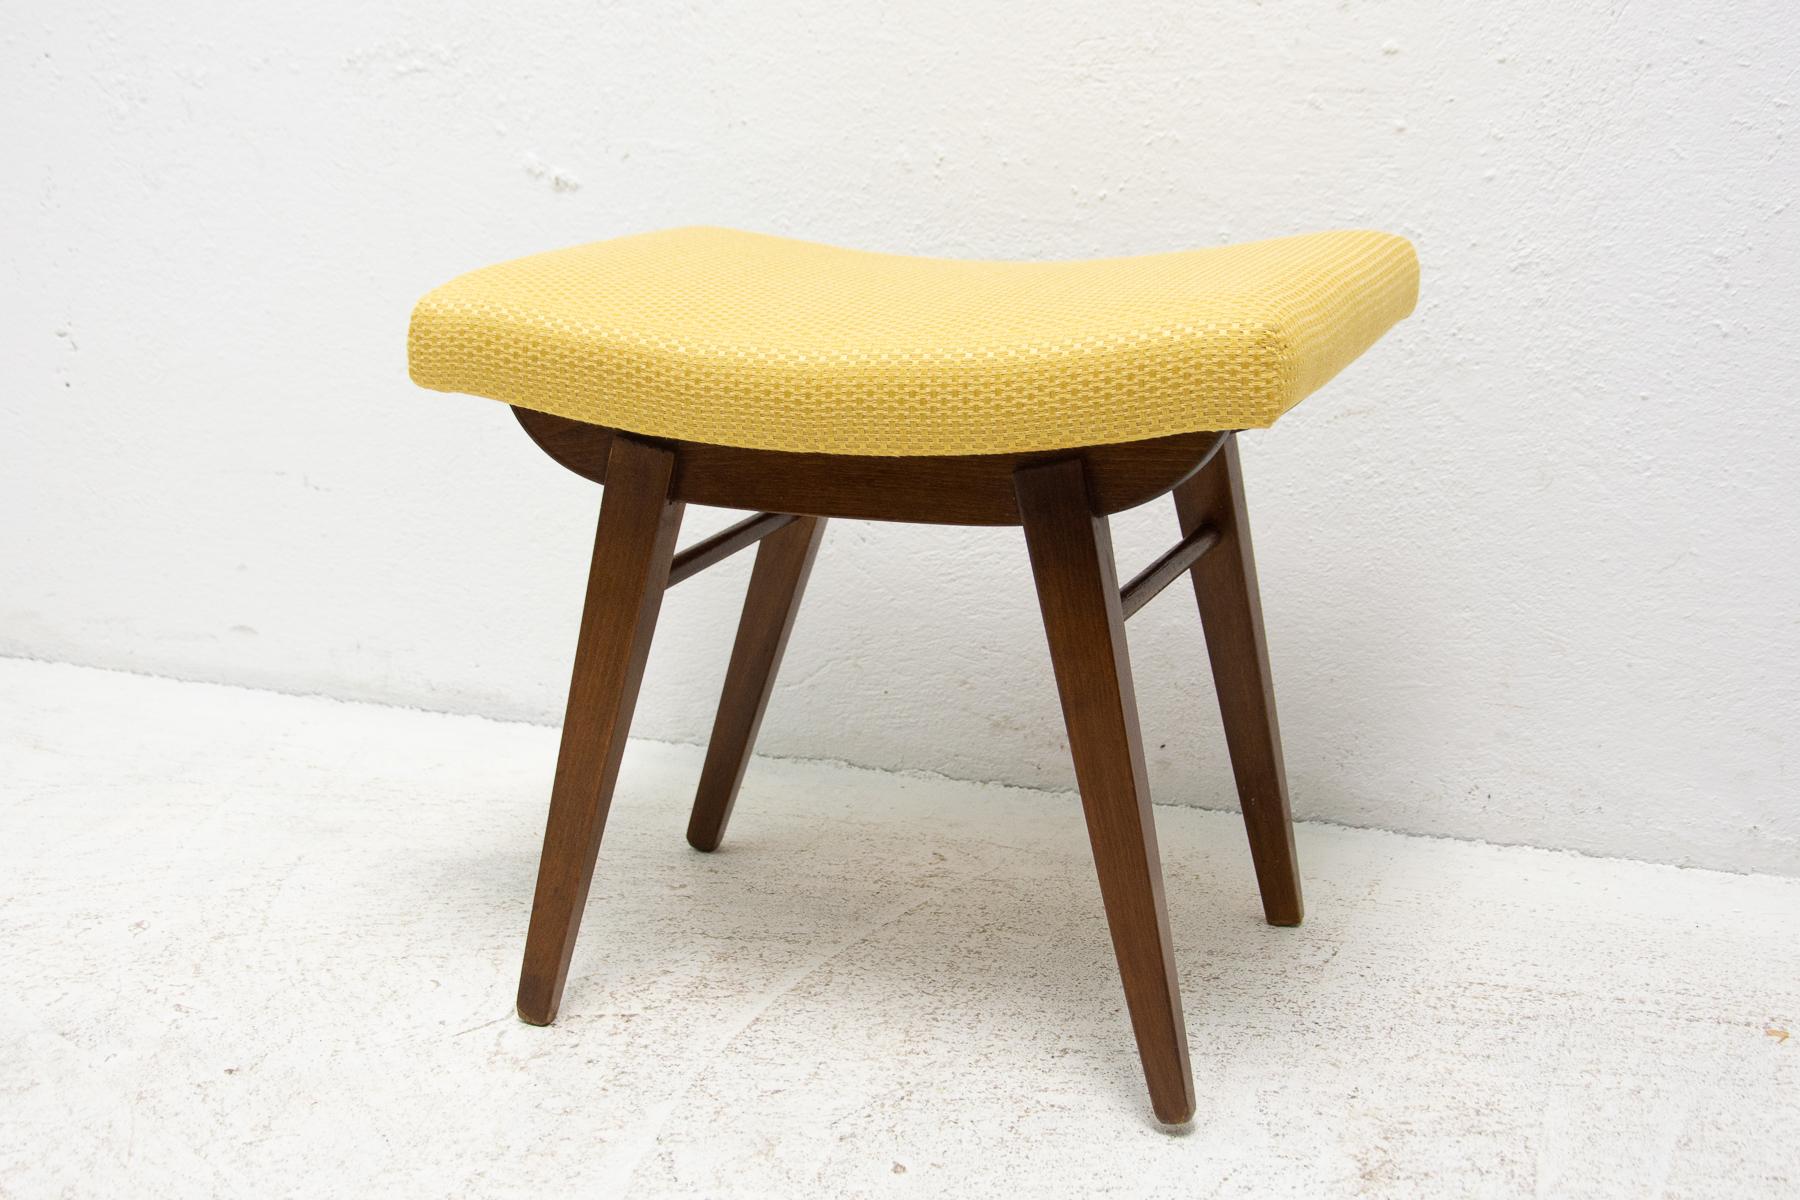 This stool/footrest was made by Západoslovenské nábytkárské Závody in the former Czechoslovakia in the 1970´s. Features an upholstered seats and structure is made of beech wood. In very good condition, new fabric.

Measures: Height: 44